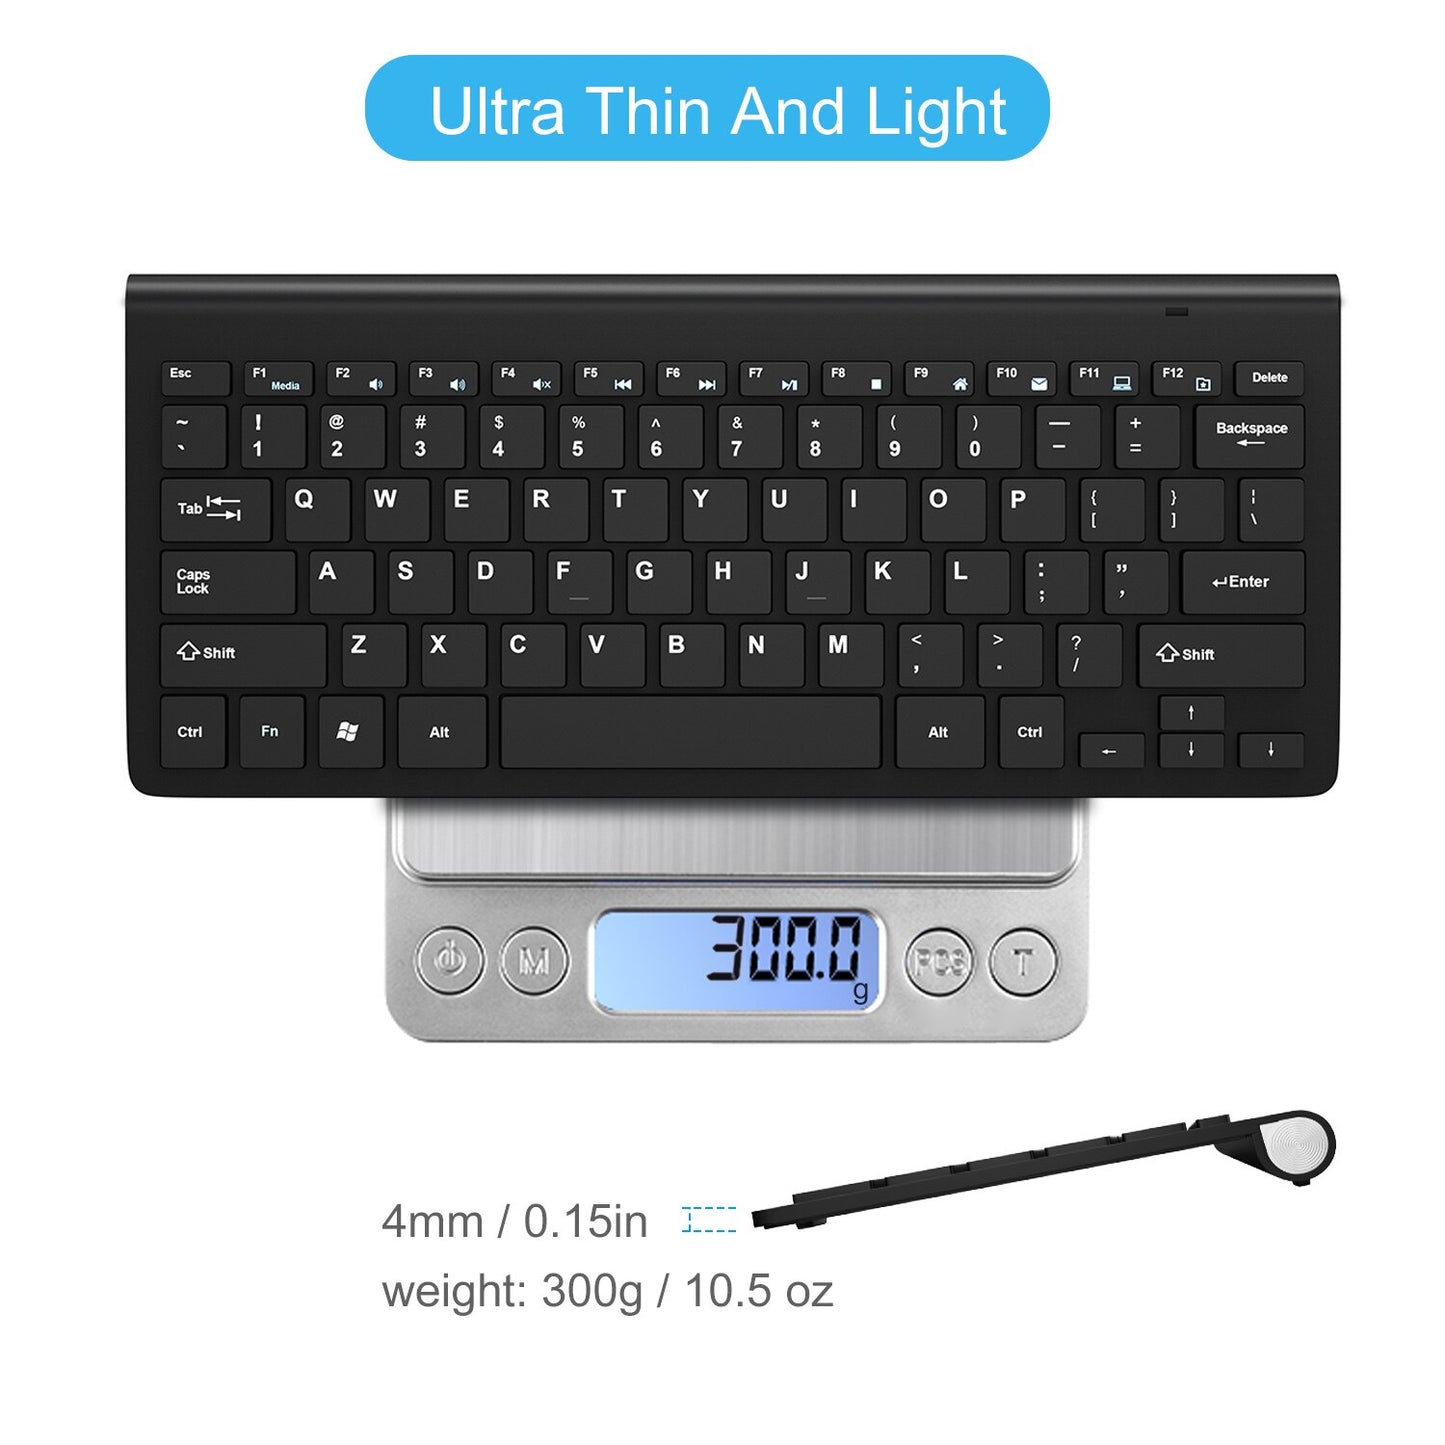 Wireless Keyboard and Mouse 2.4G USB Mini keyboard Mouse Combos Noiseless Ergonomic Keyboard with mouse set For PC Laptop TV